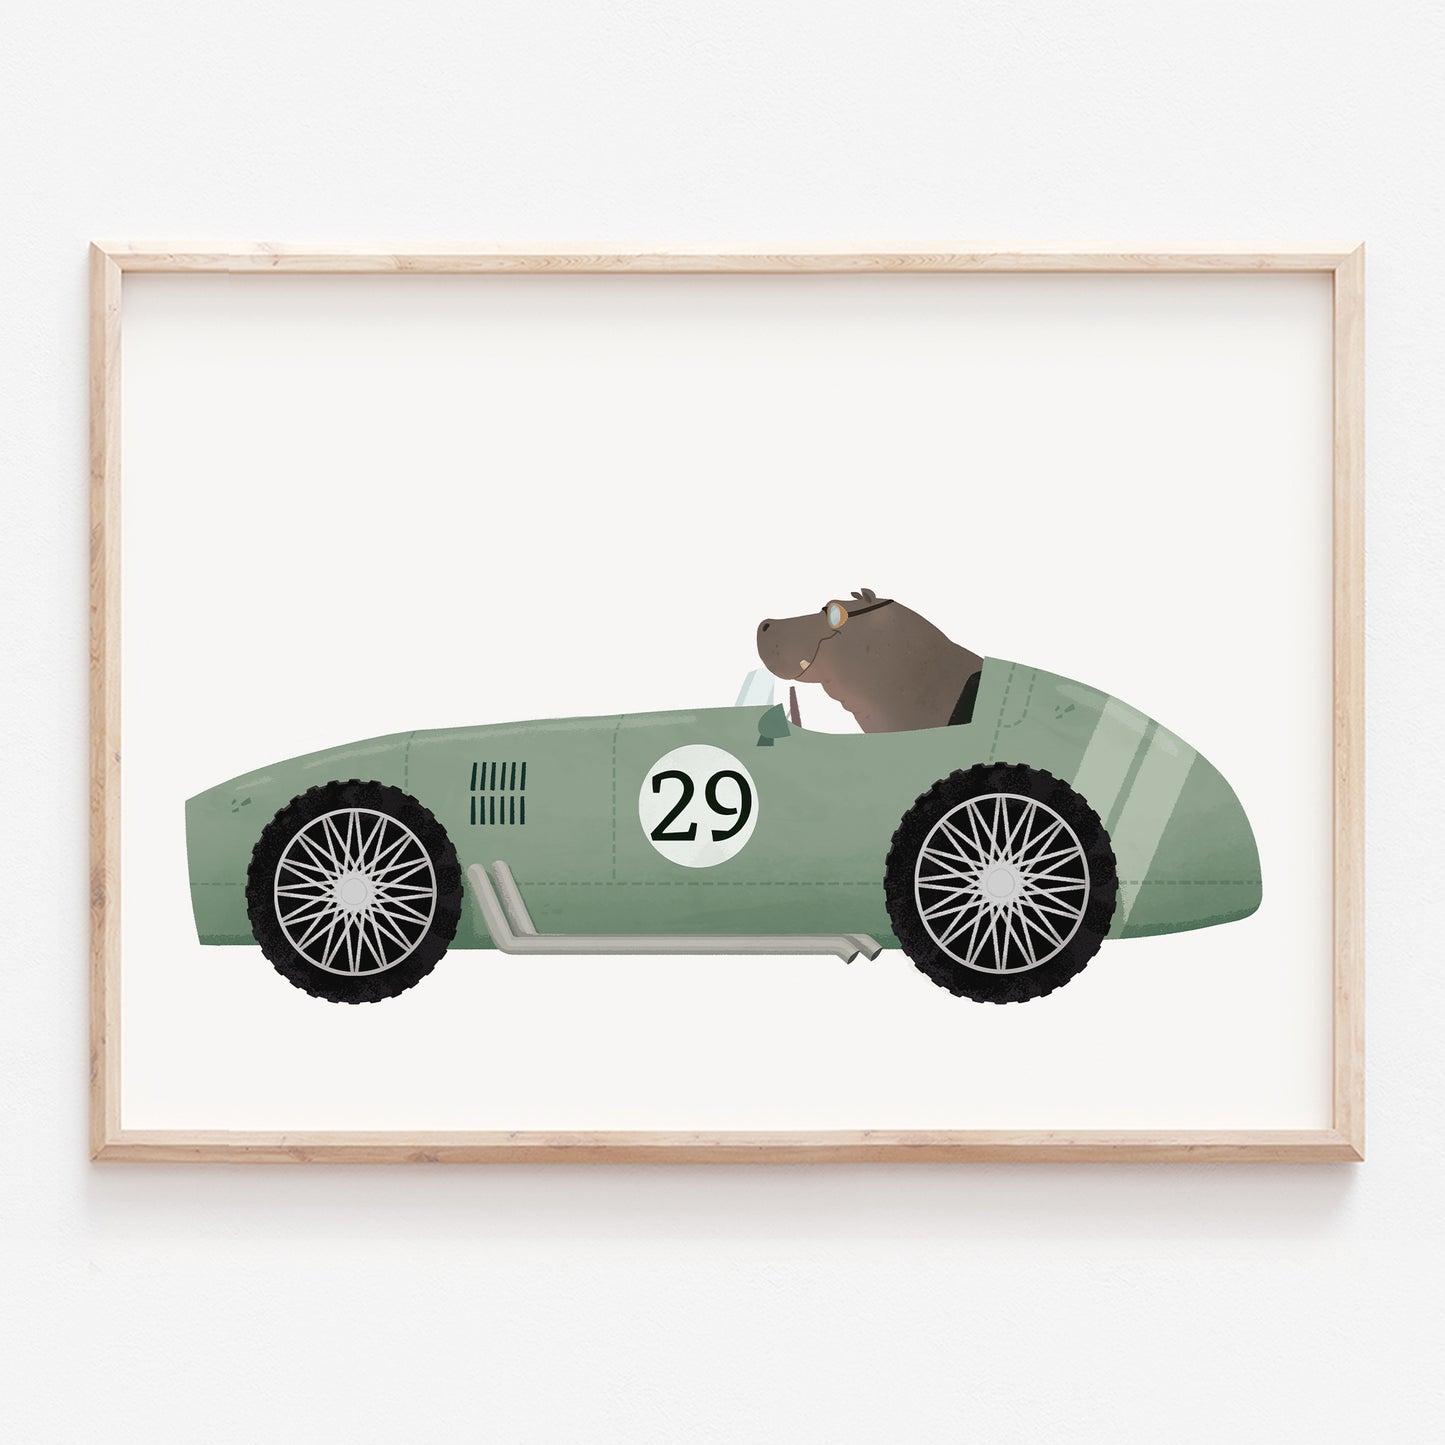 Hippo driving a vintage racing car